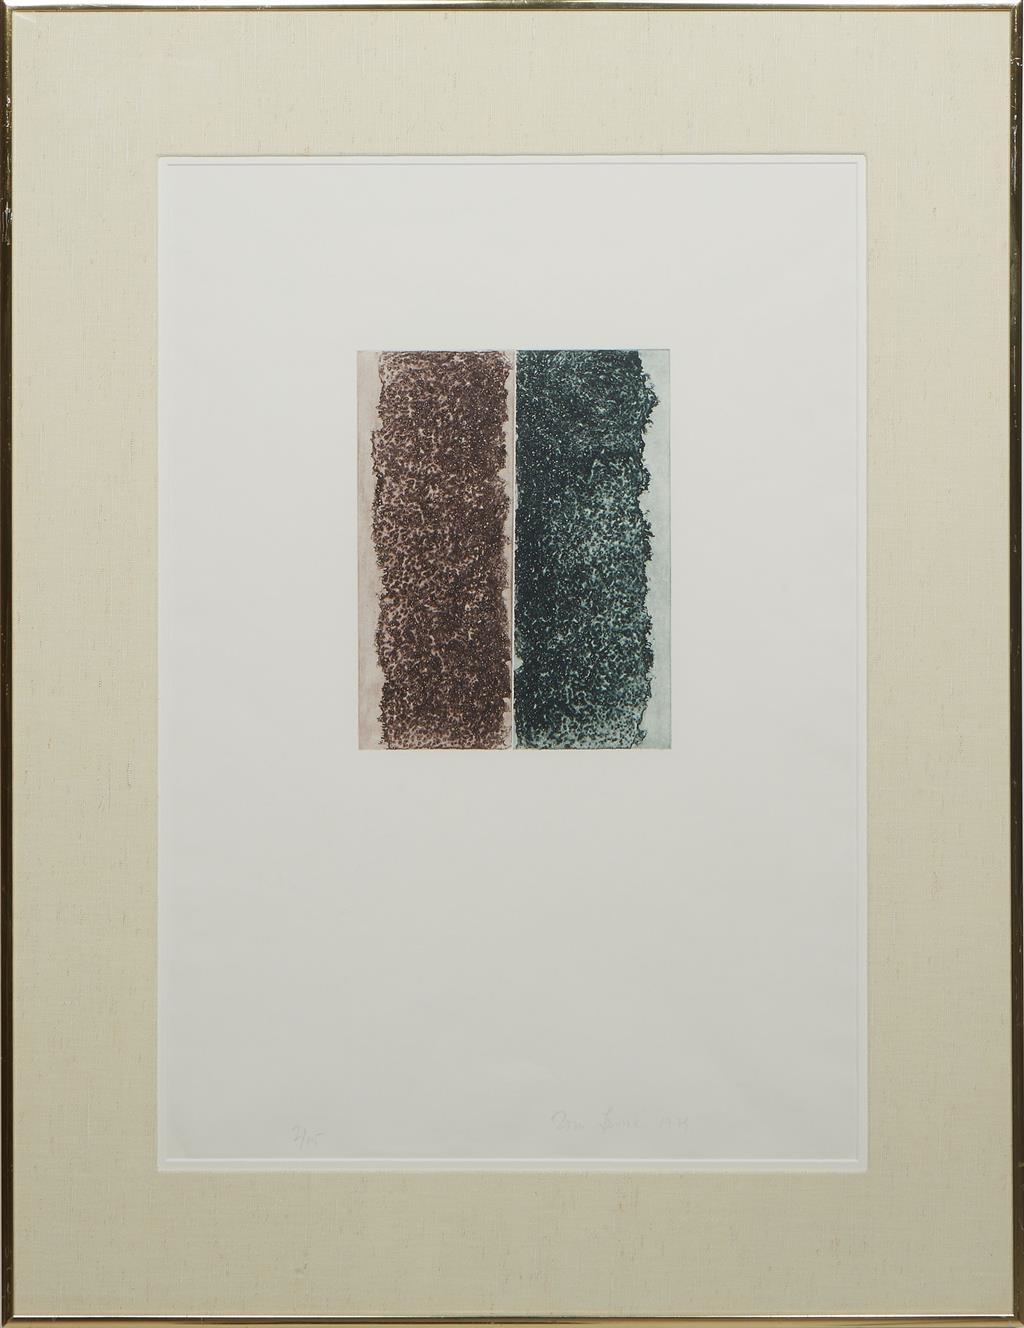 Untitled (Abstract), by Tom Levine, 1979